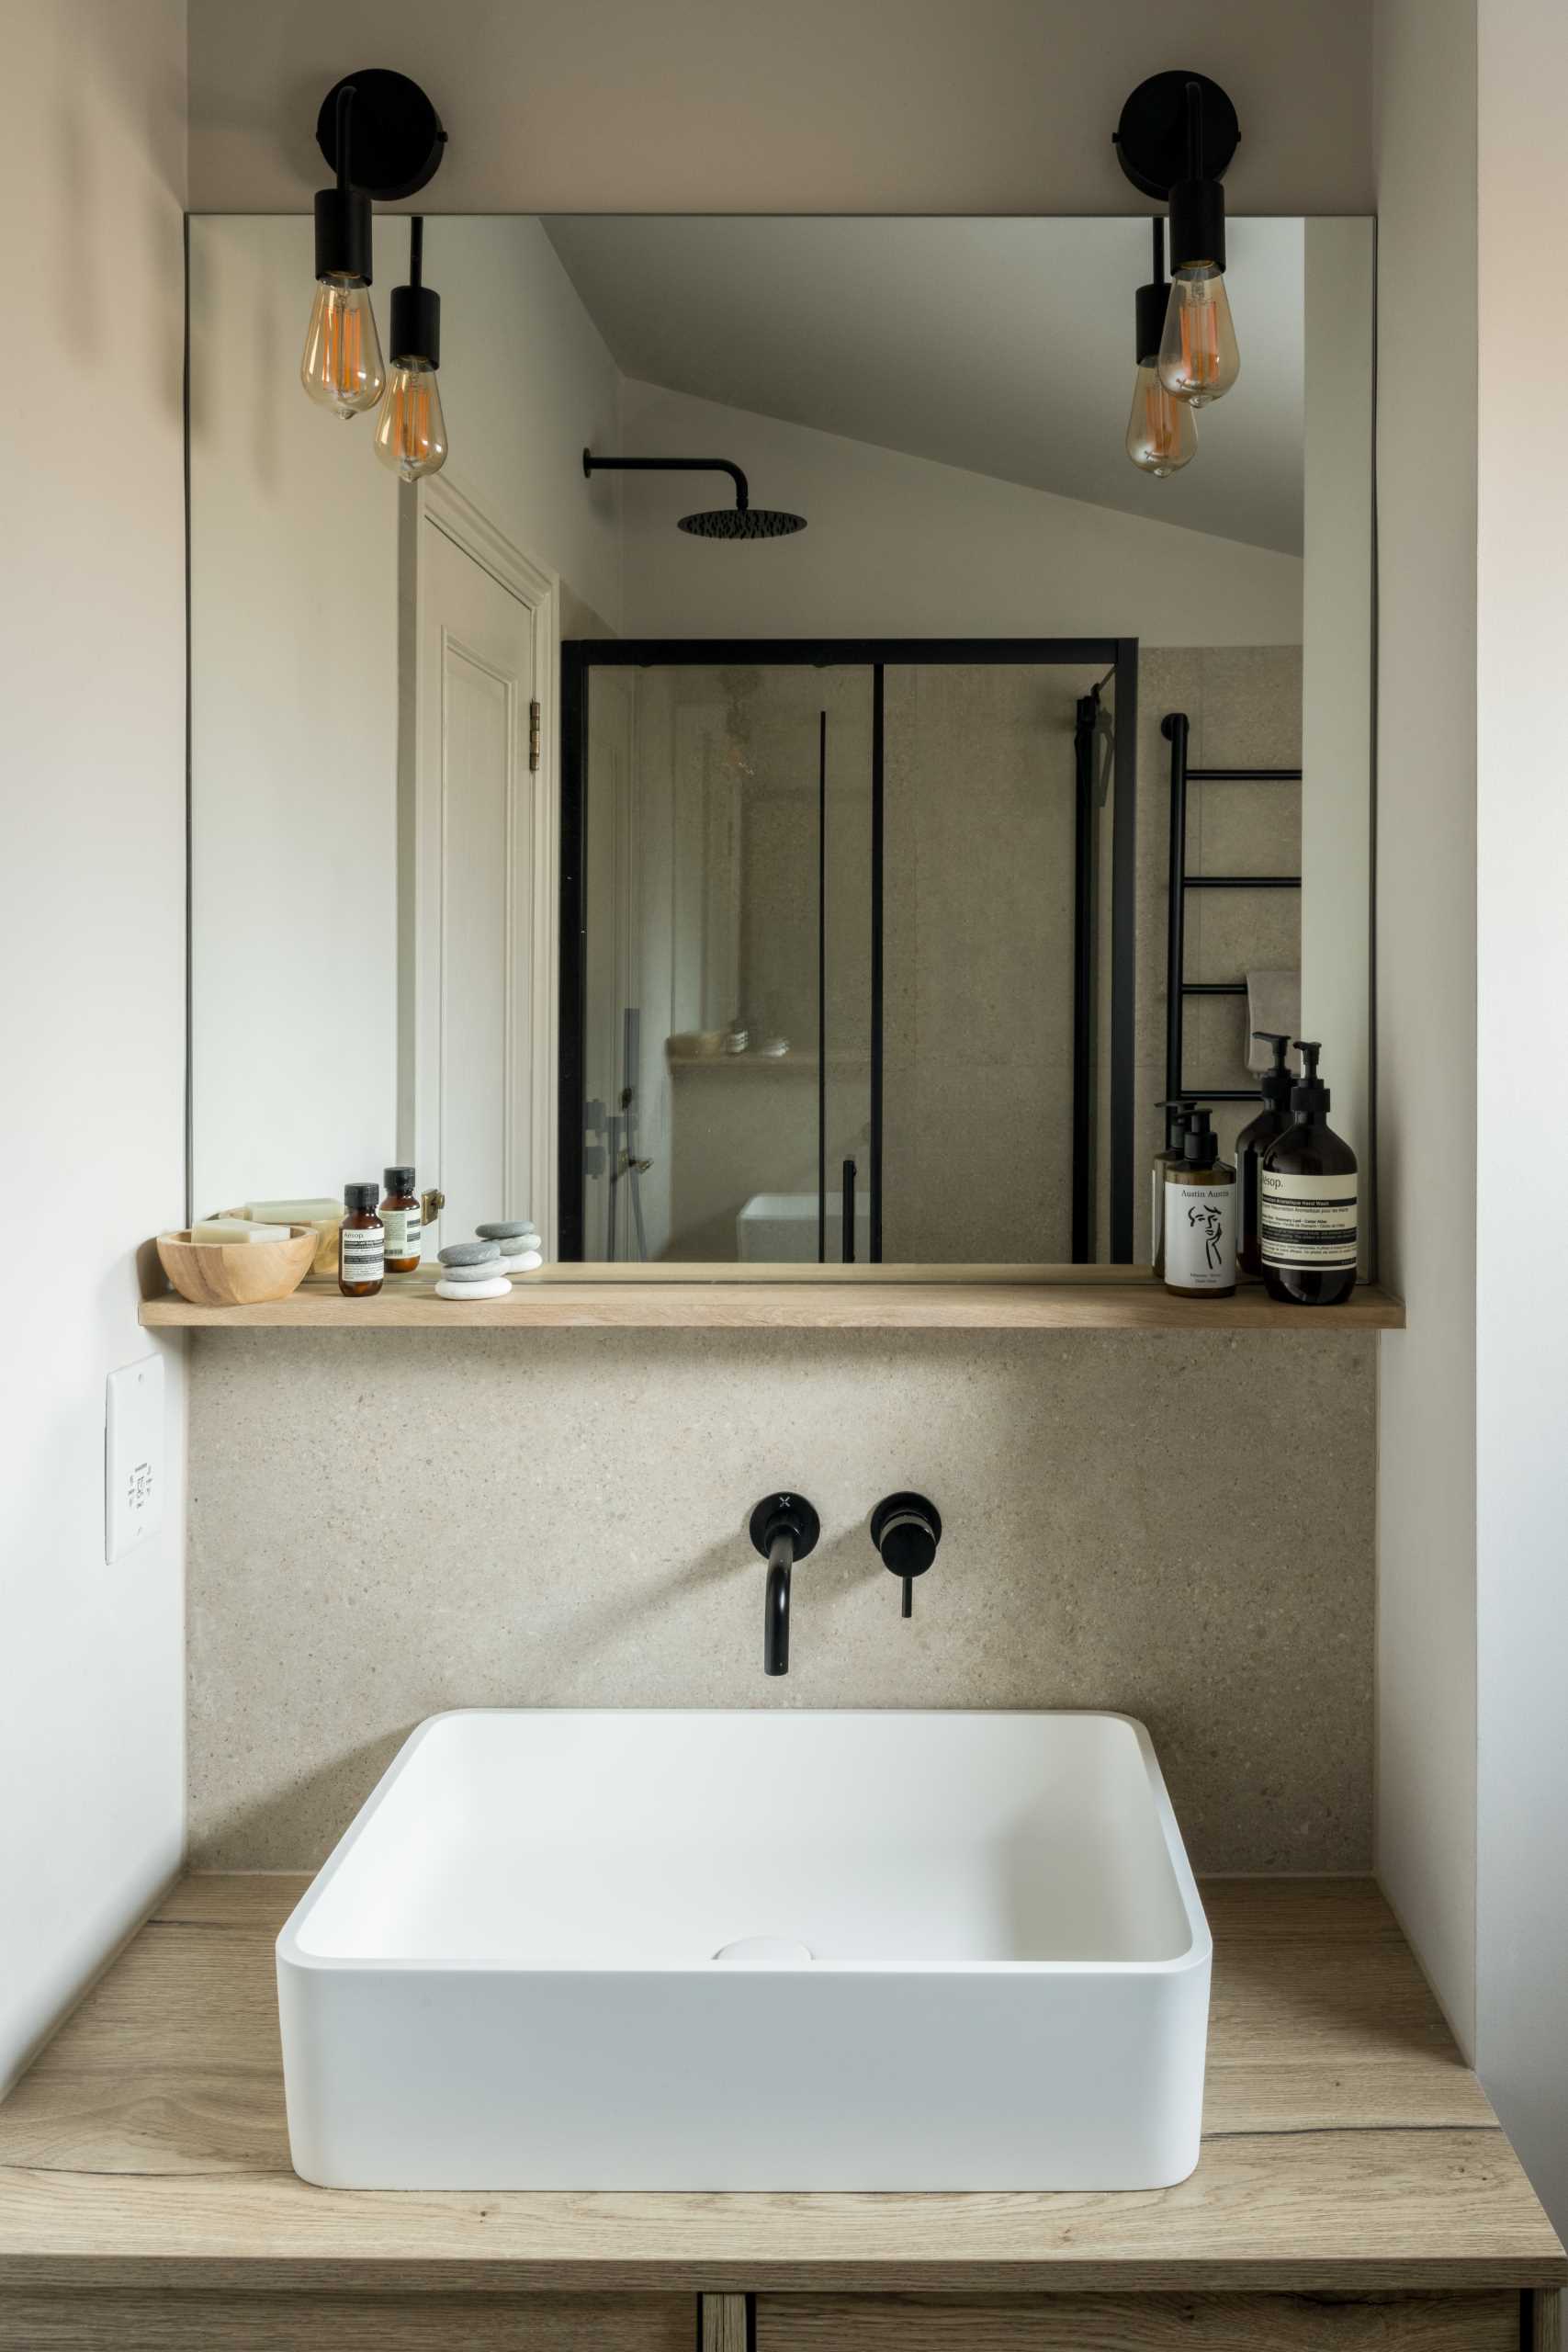 In this bathroom, black accents have been paired with neutral tones for a contemporary look.